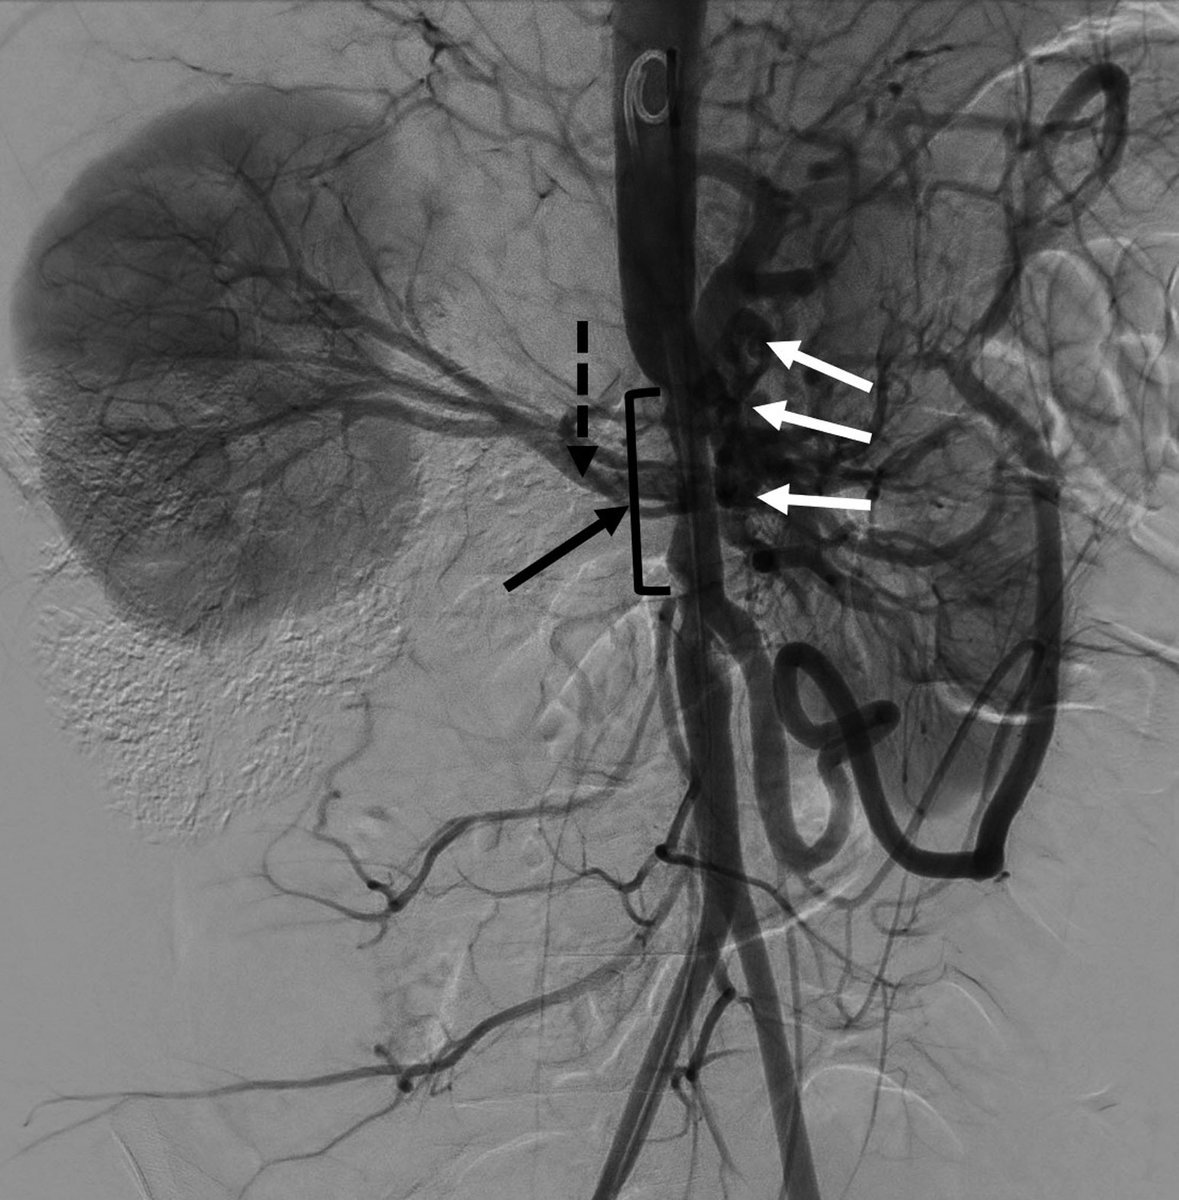 Images in #Anesthesiology - Mid-Aortic Syndrome 📷 ow.ly/nPjH50QeBo3